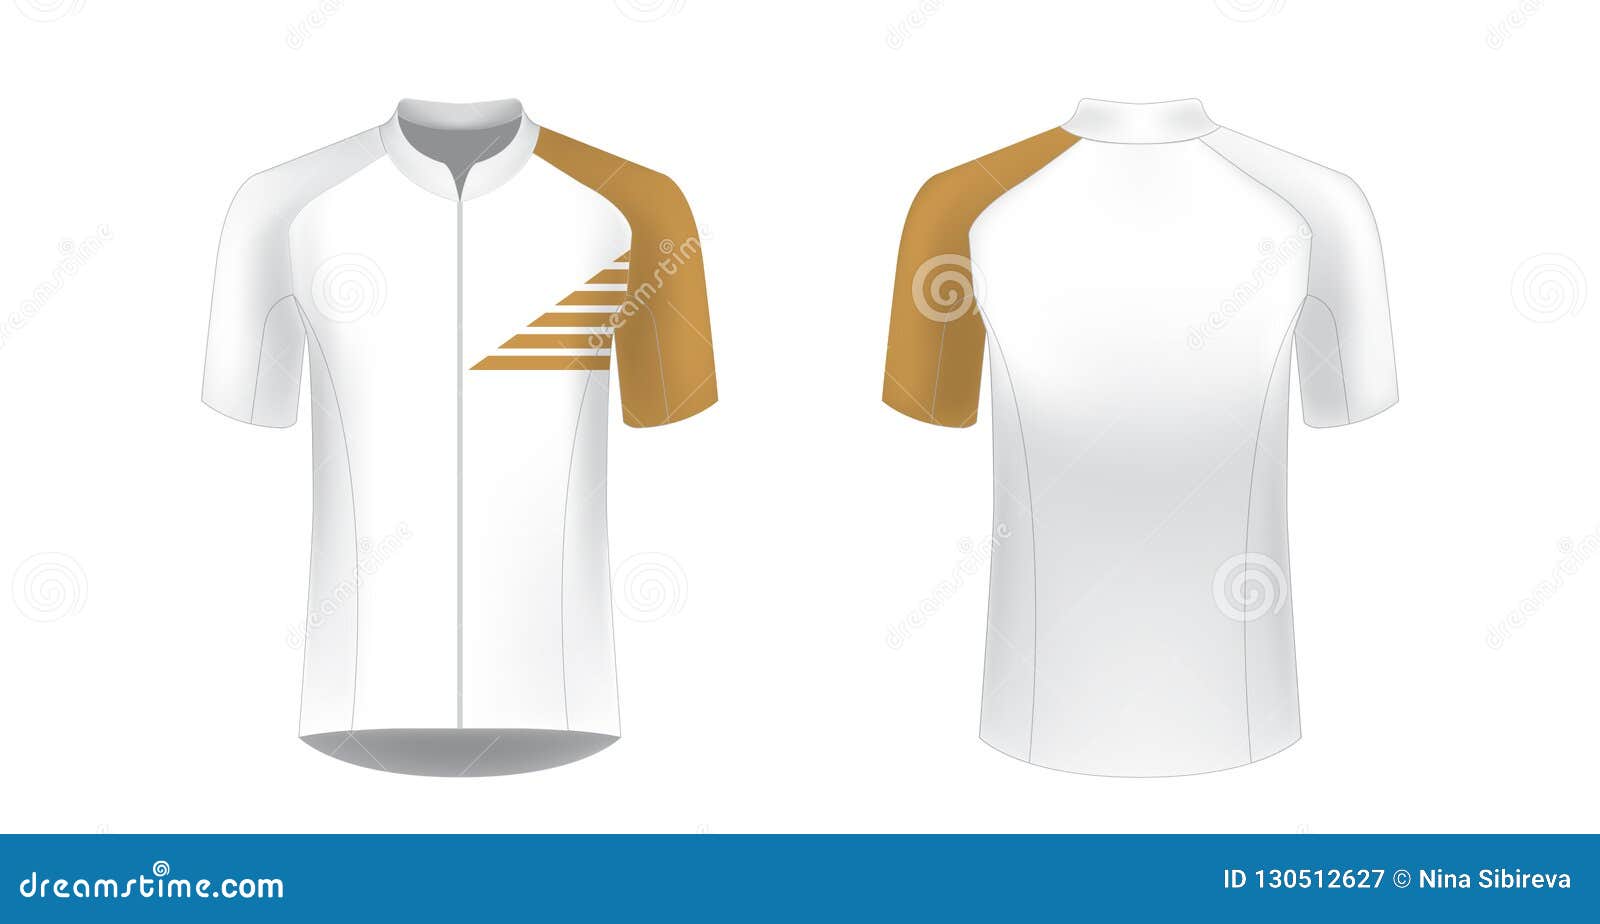 Download 42+ Mens Triathlon Top Mockup Gif Yellowimages - Free PSD ...